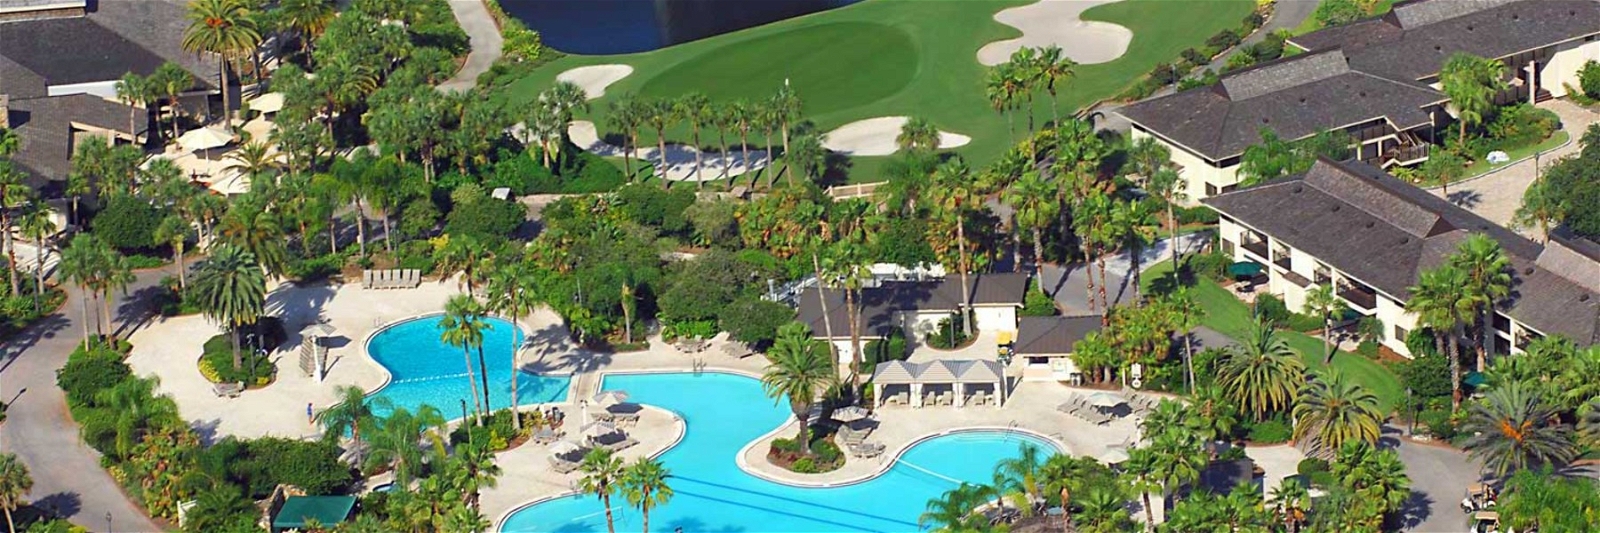 Golf Vacation Package - Saddlebrook Resort Golf Getaway from $333 per person per day!